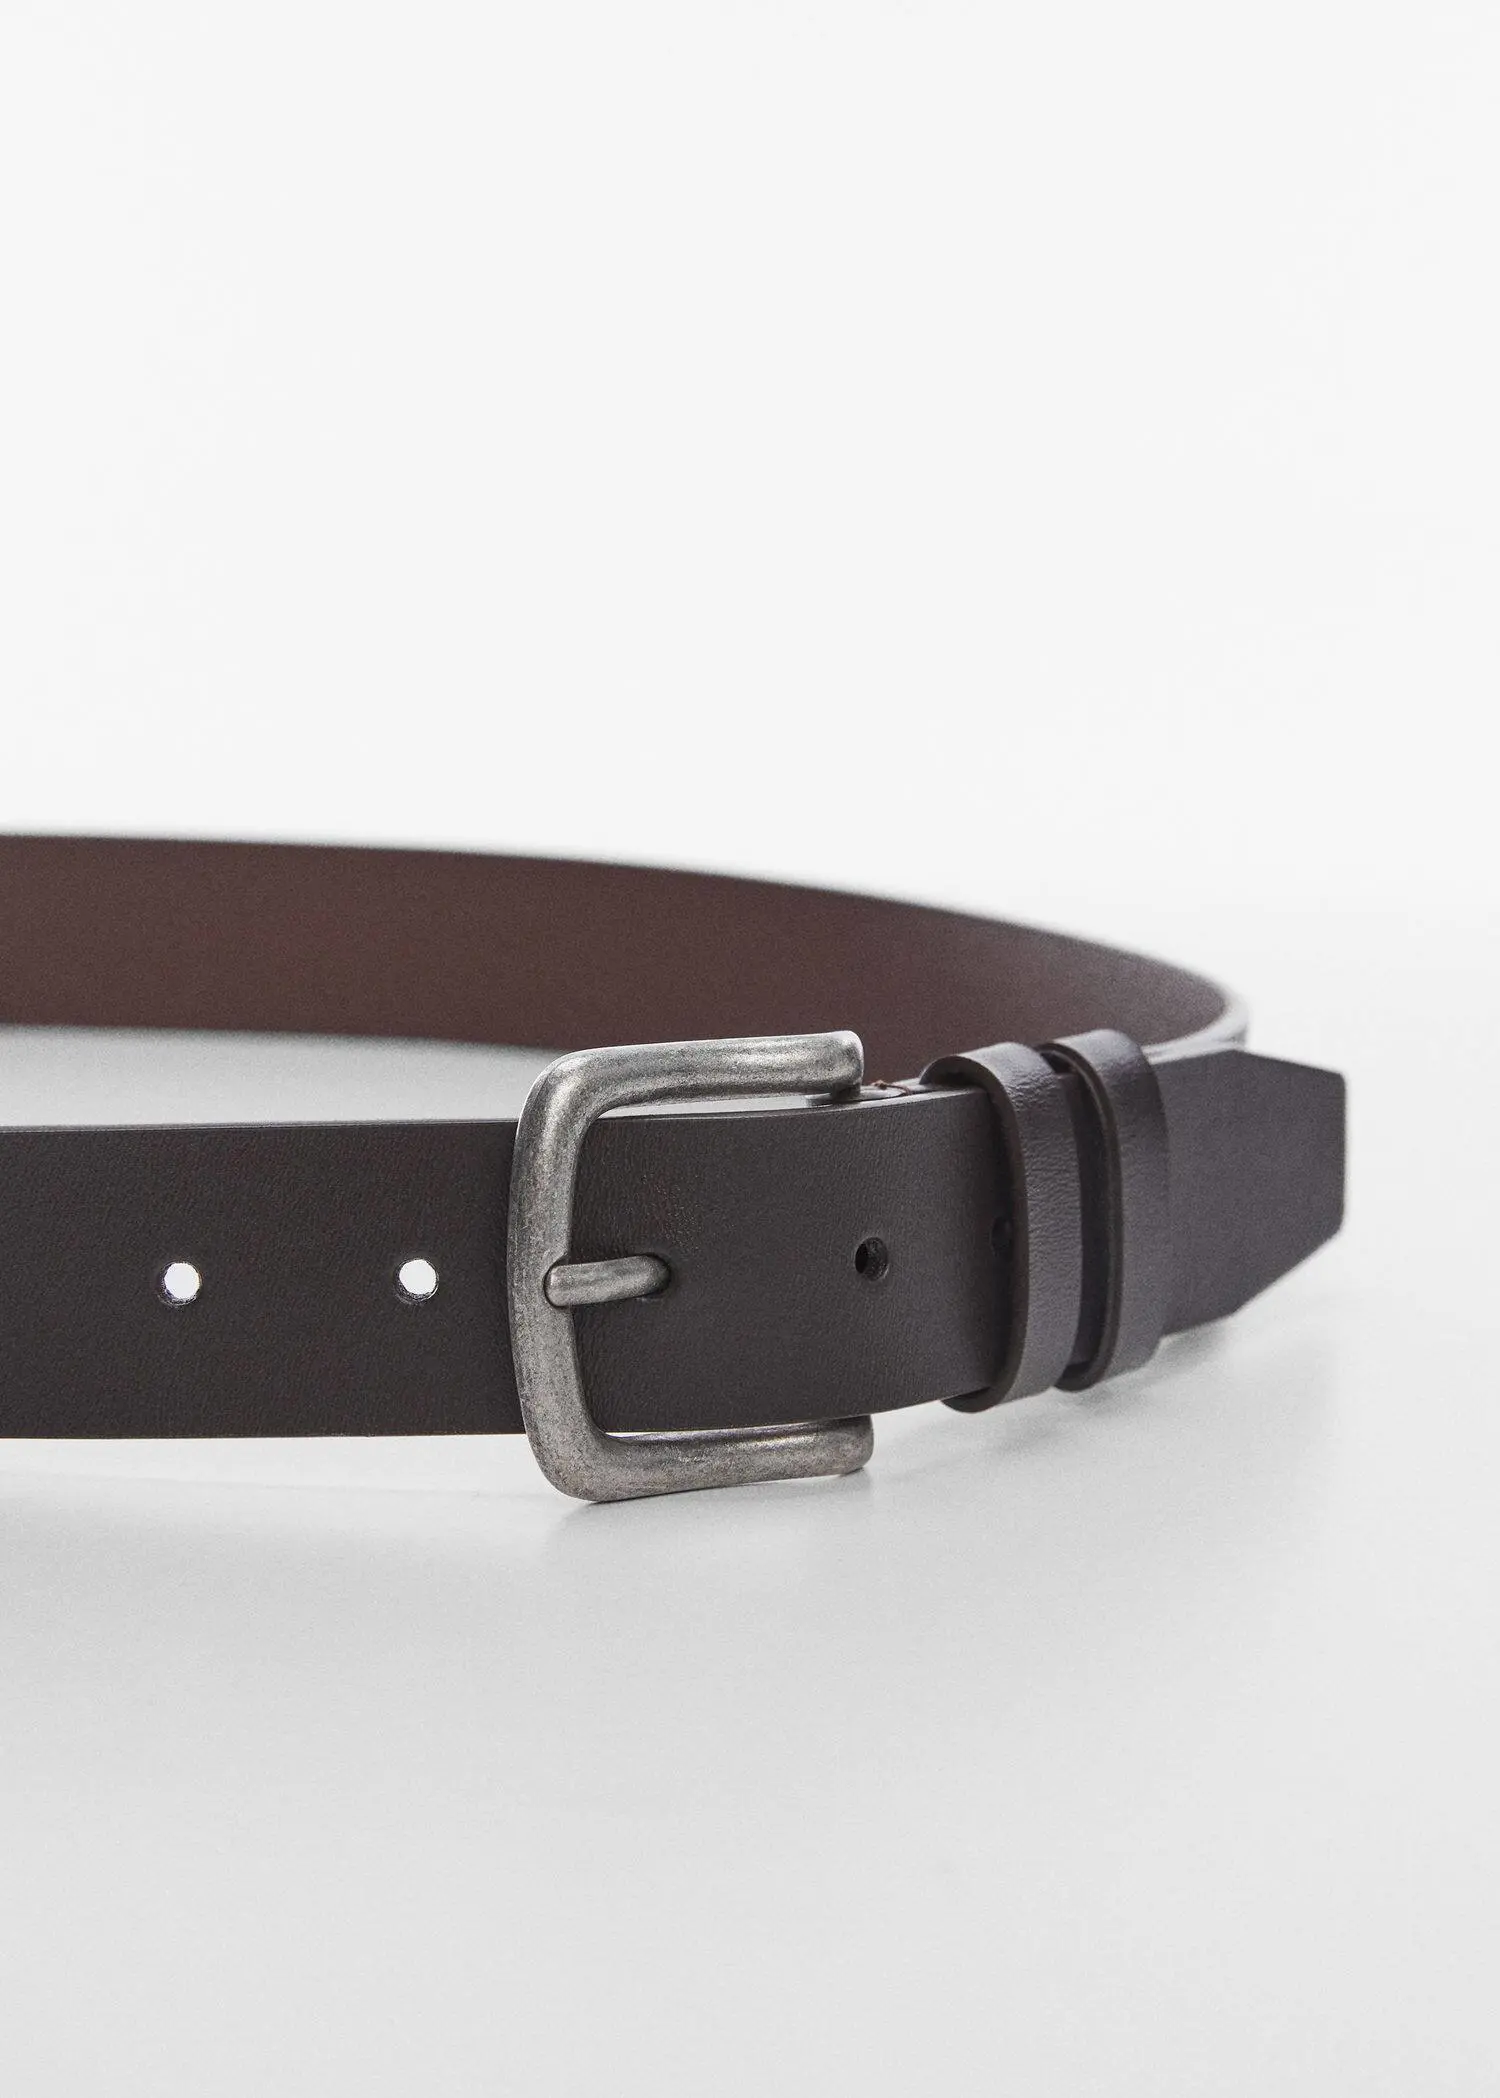 Mango Buckle leather belt. a close-up of a black leather belt with a silver buckle. 